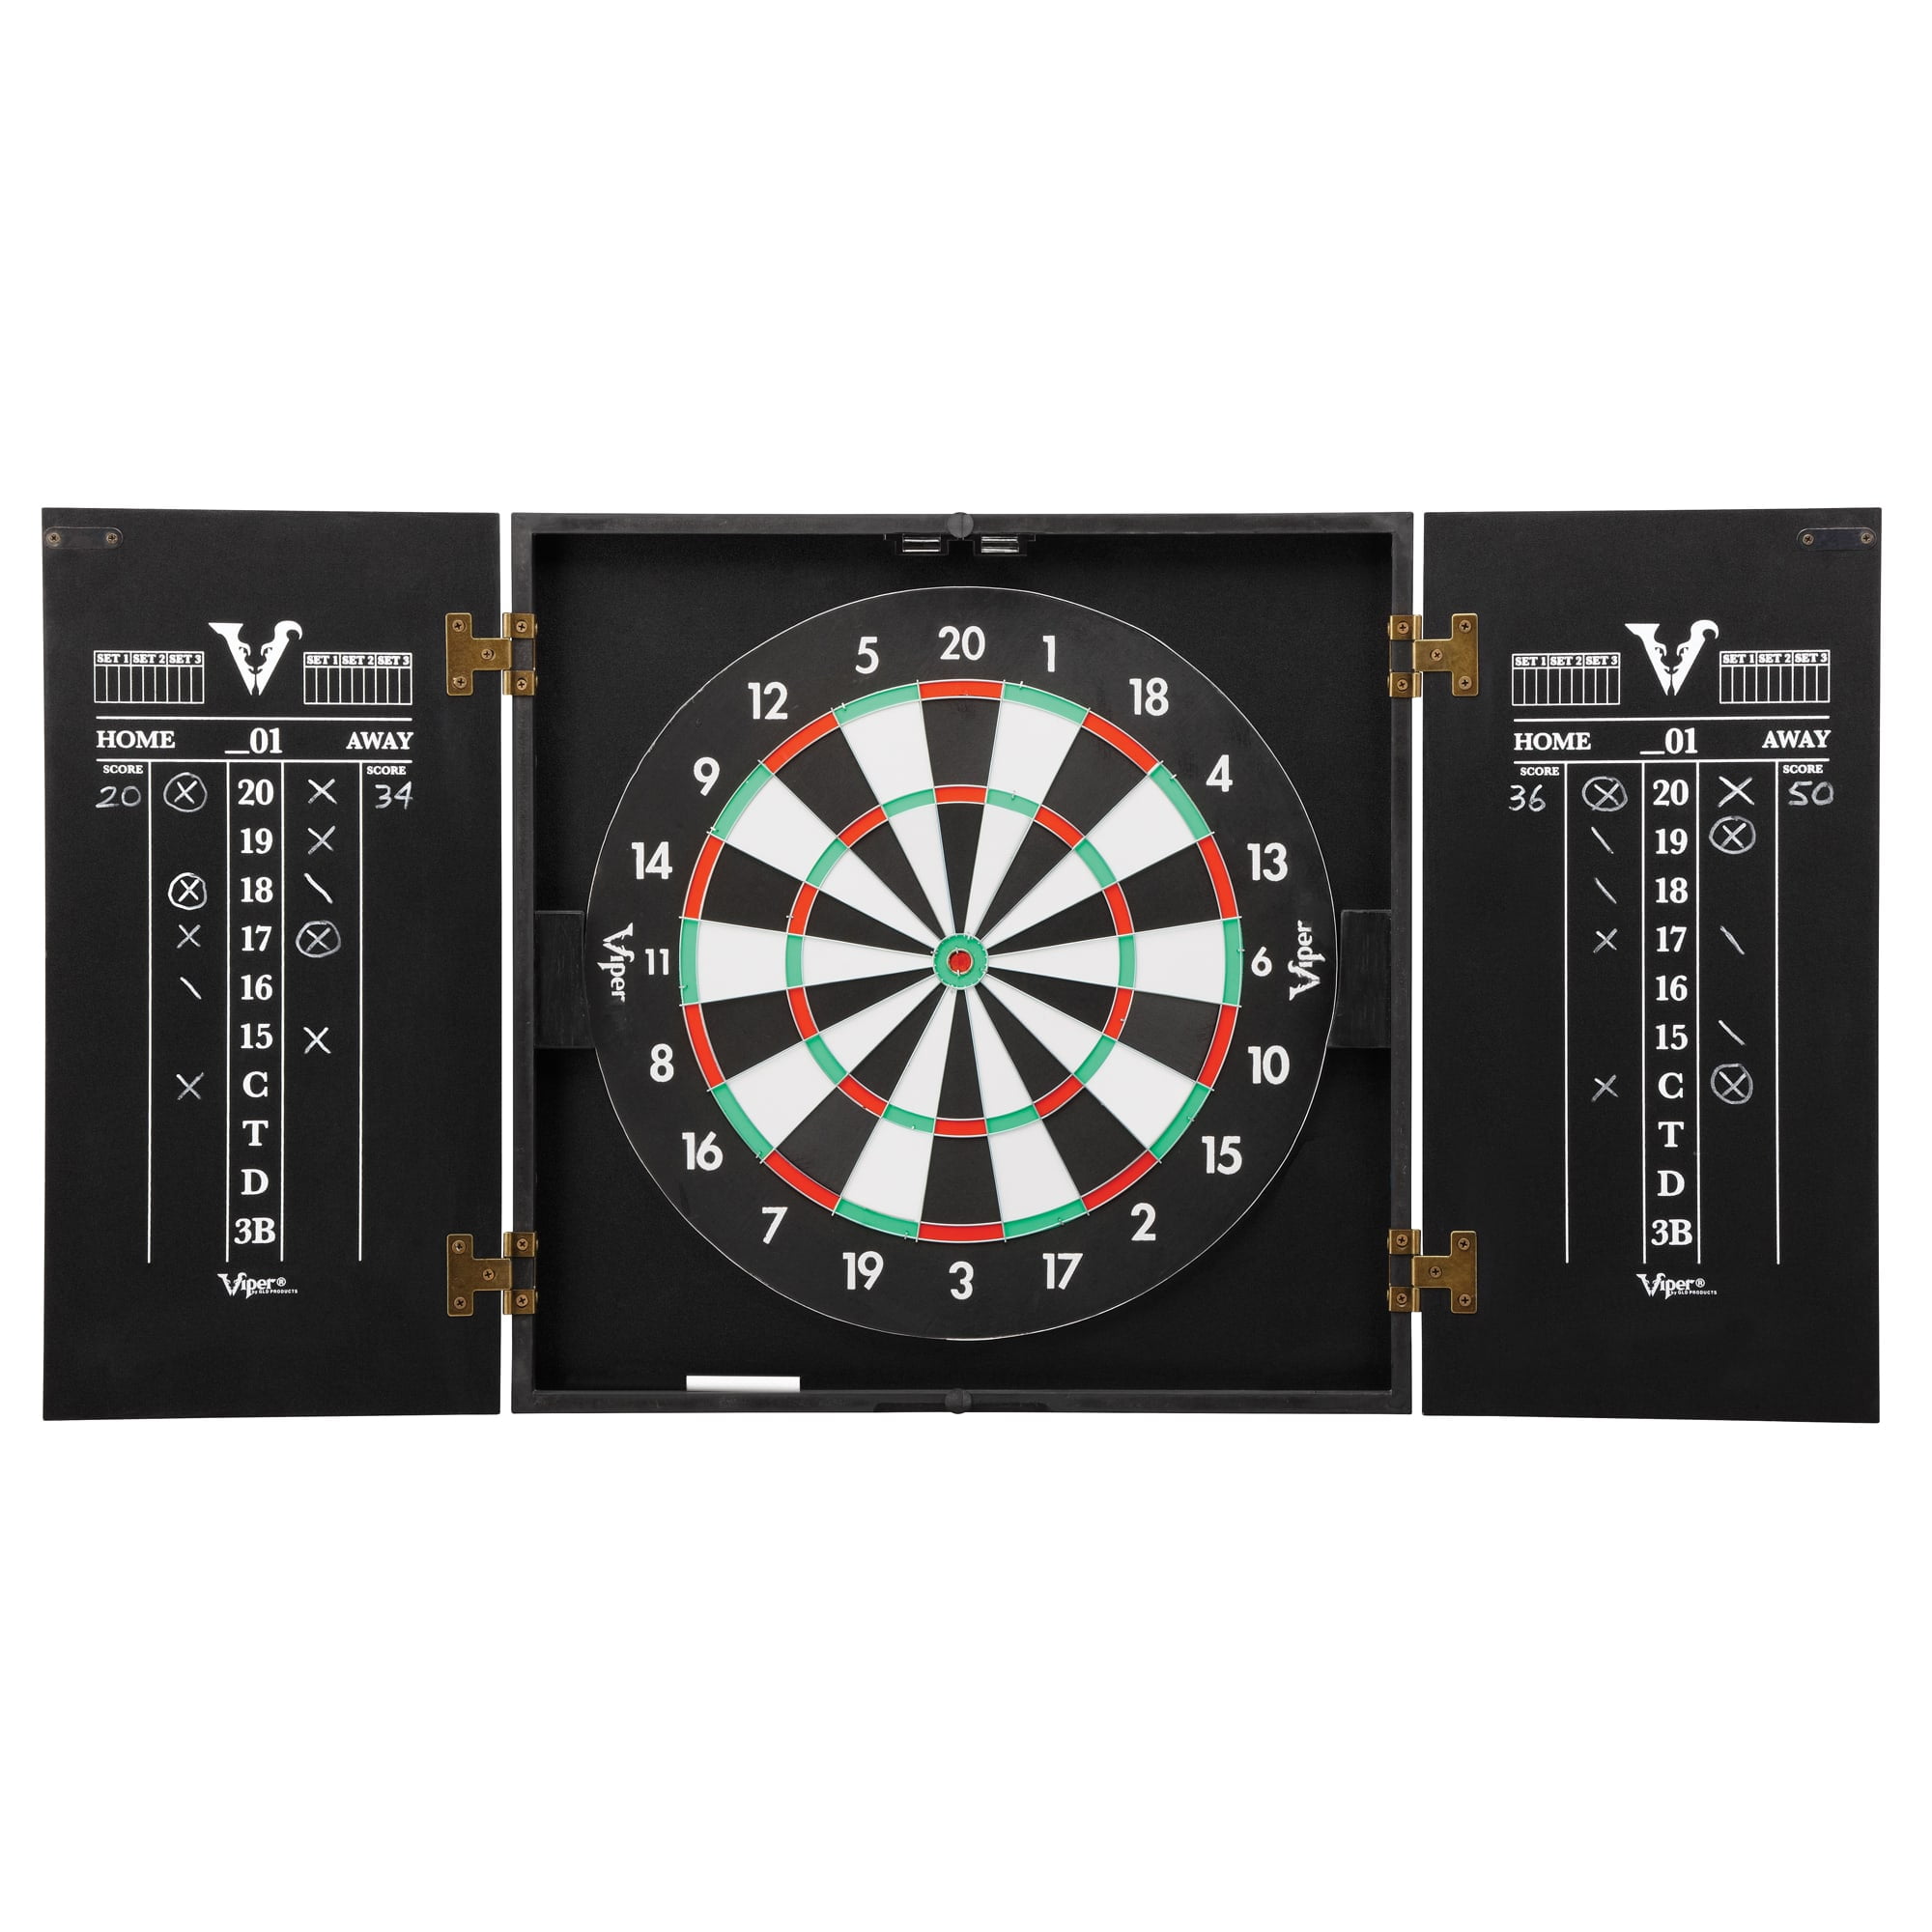 Viper Dry Erase Scoreboard Cricket and 01 Dart Games White 15.5in H X 8in W for sale online 